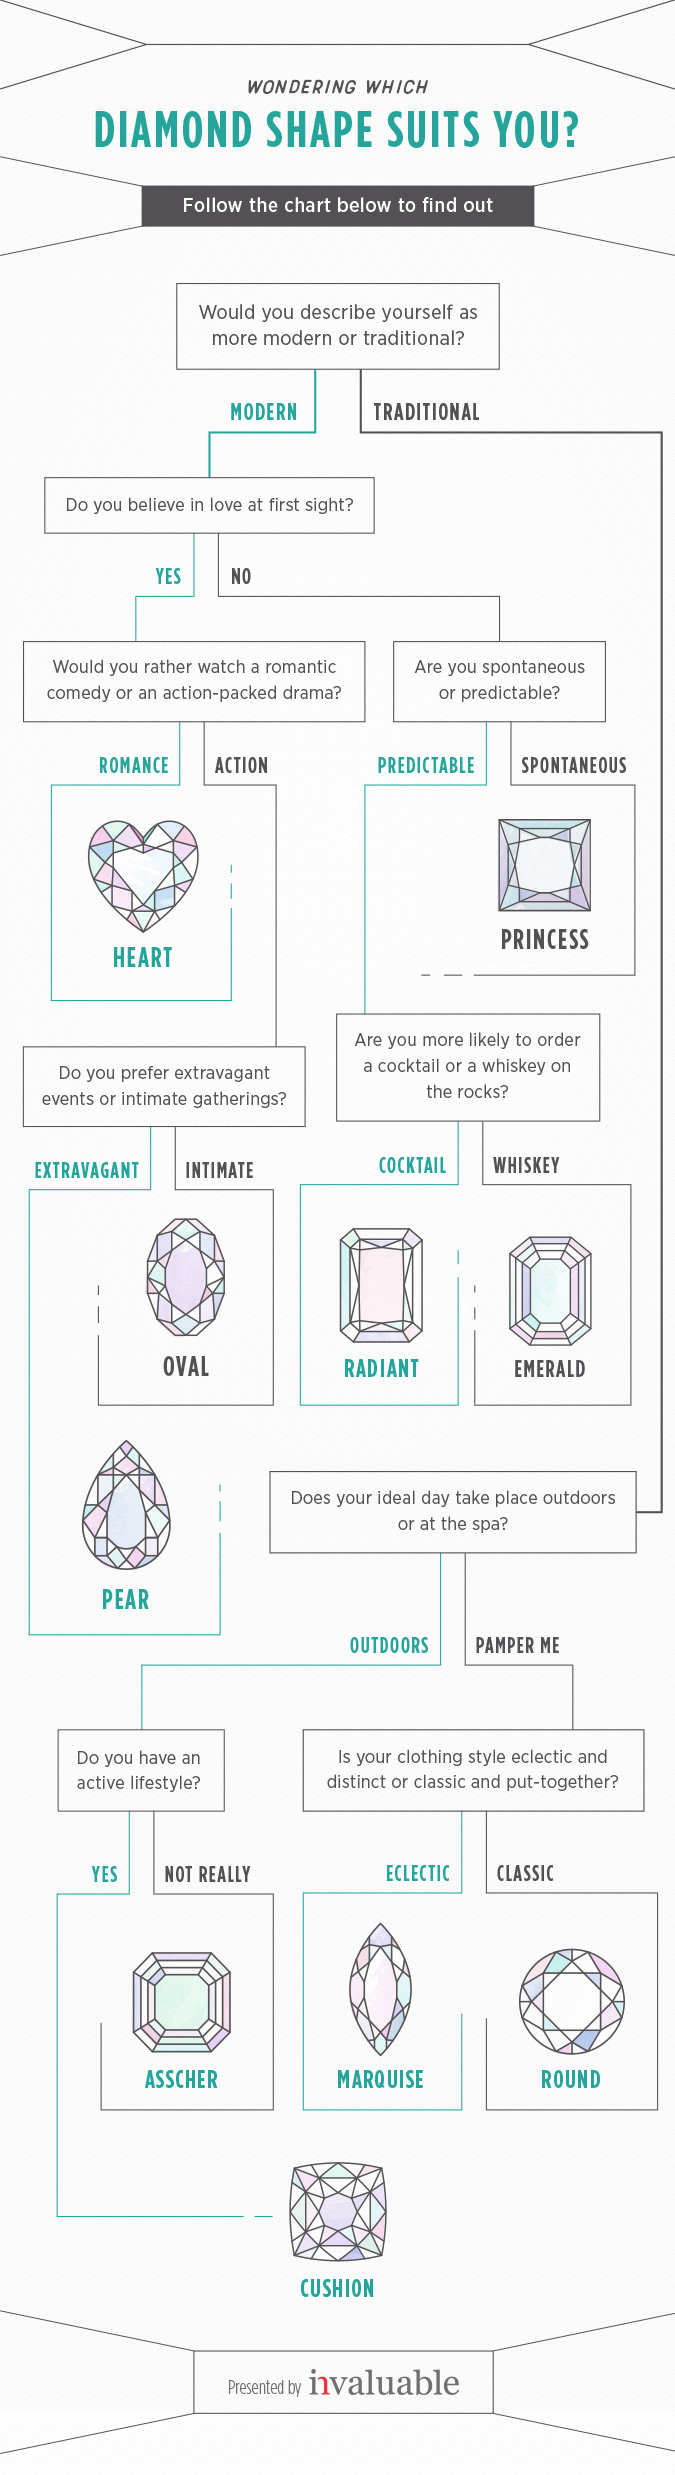 Quiz: which diamond shape are you?